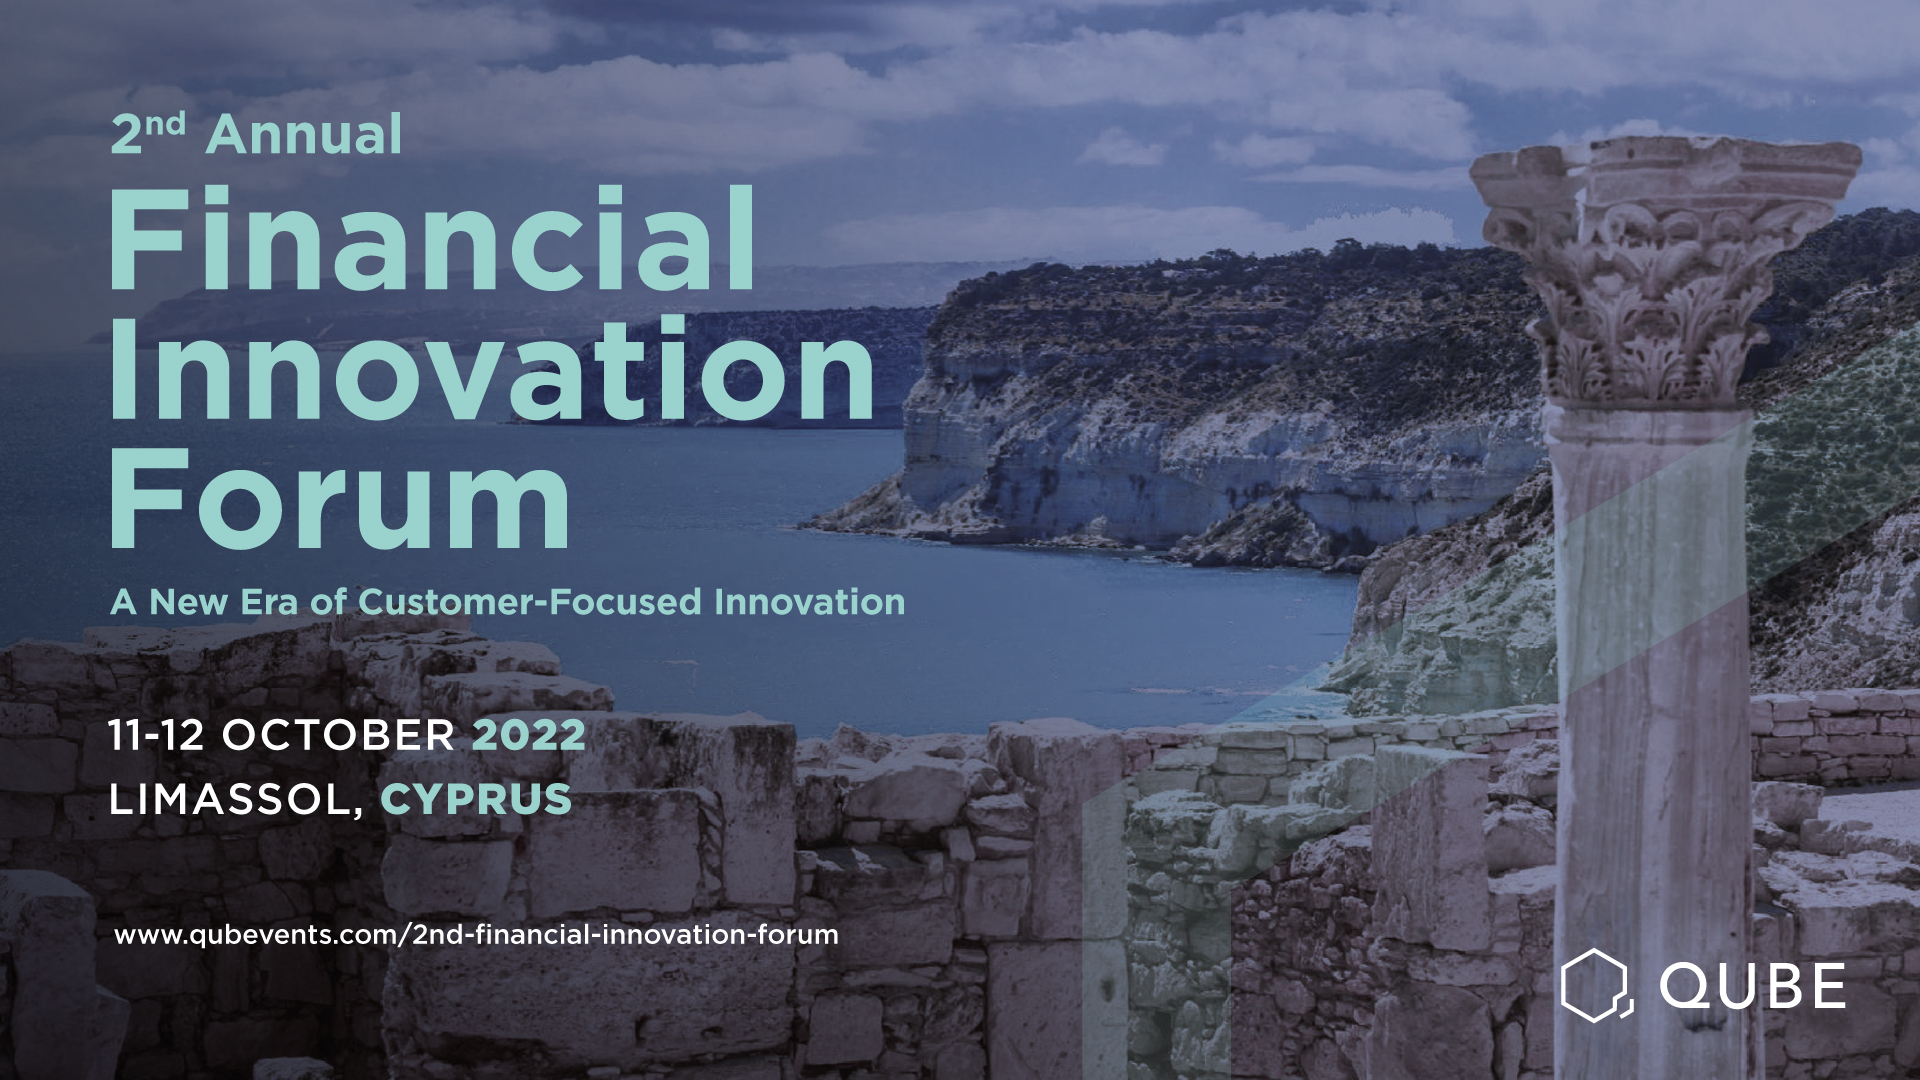 The 2nd Annual Financial Innovation Forum